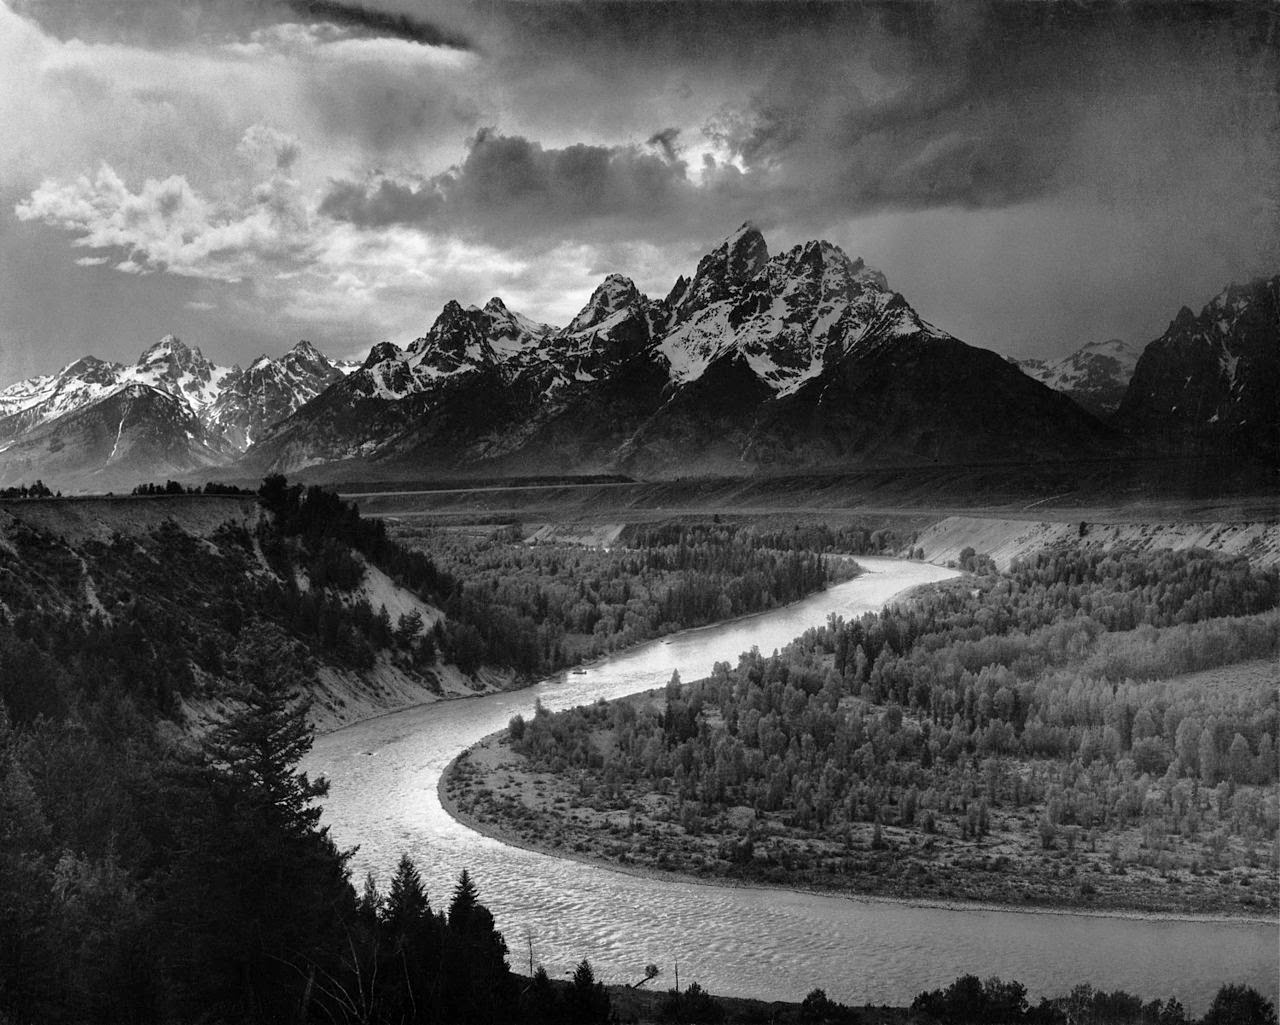 31 Photography Task 1 [Part 4] - Researching Famous Photographers (Ansel Adams)